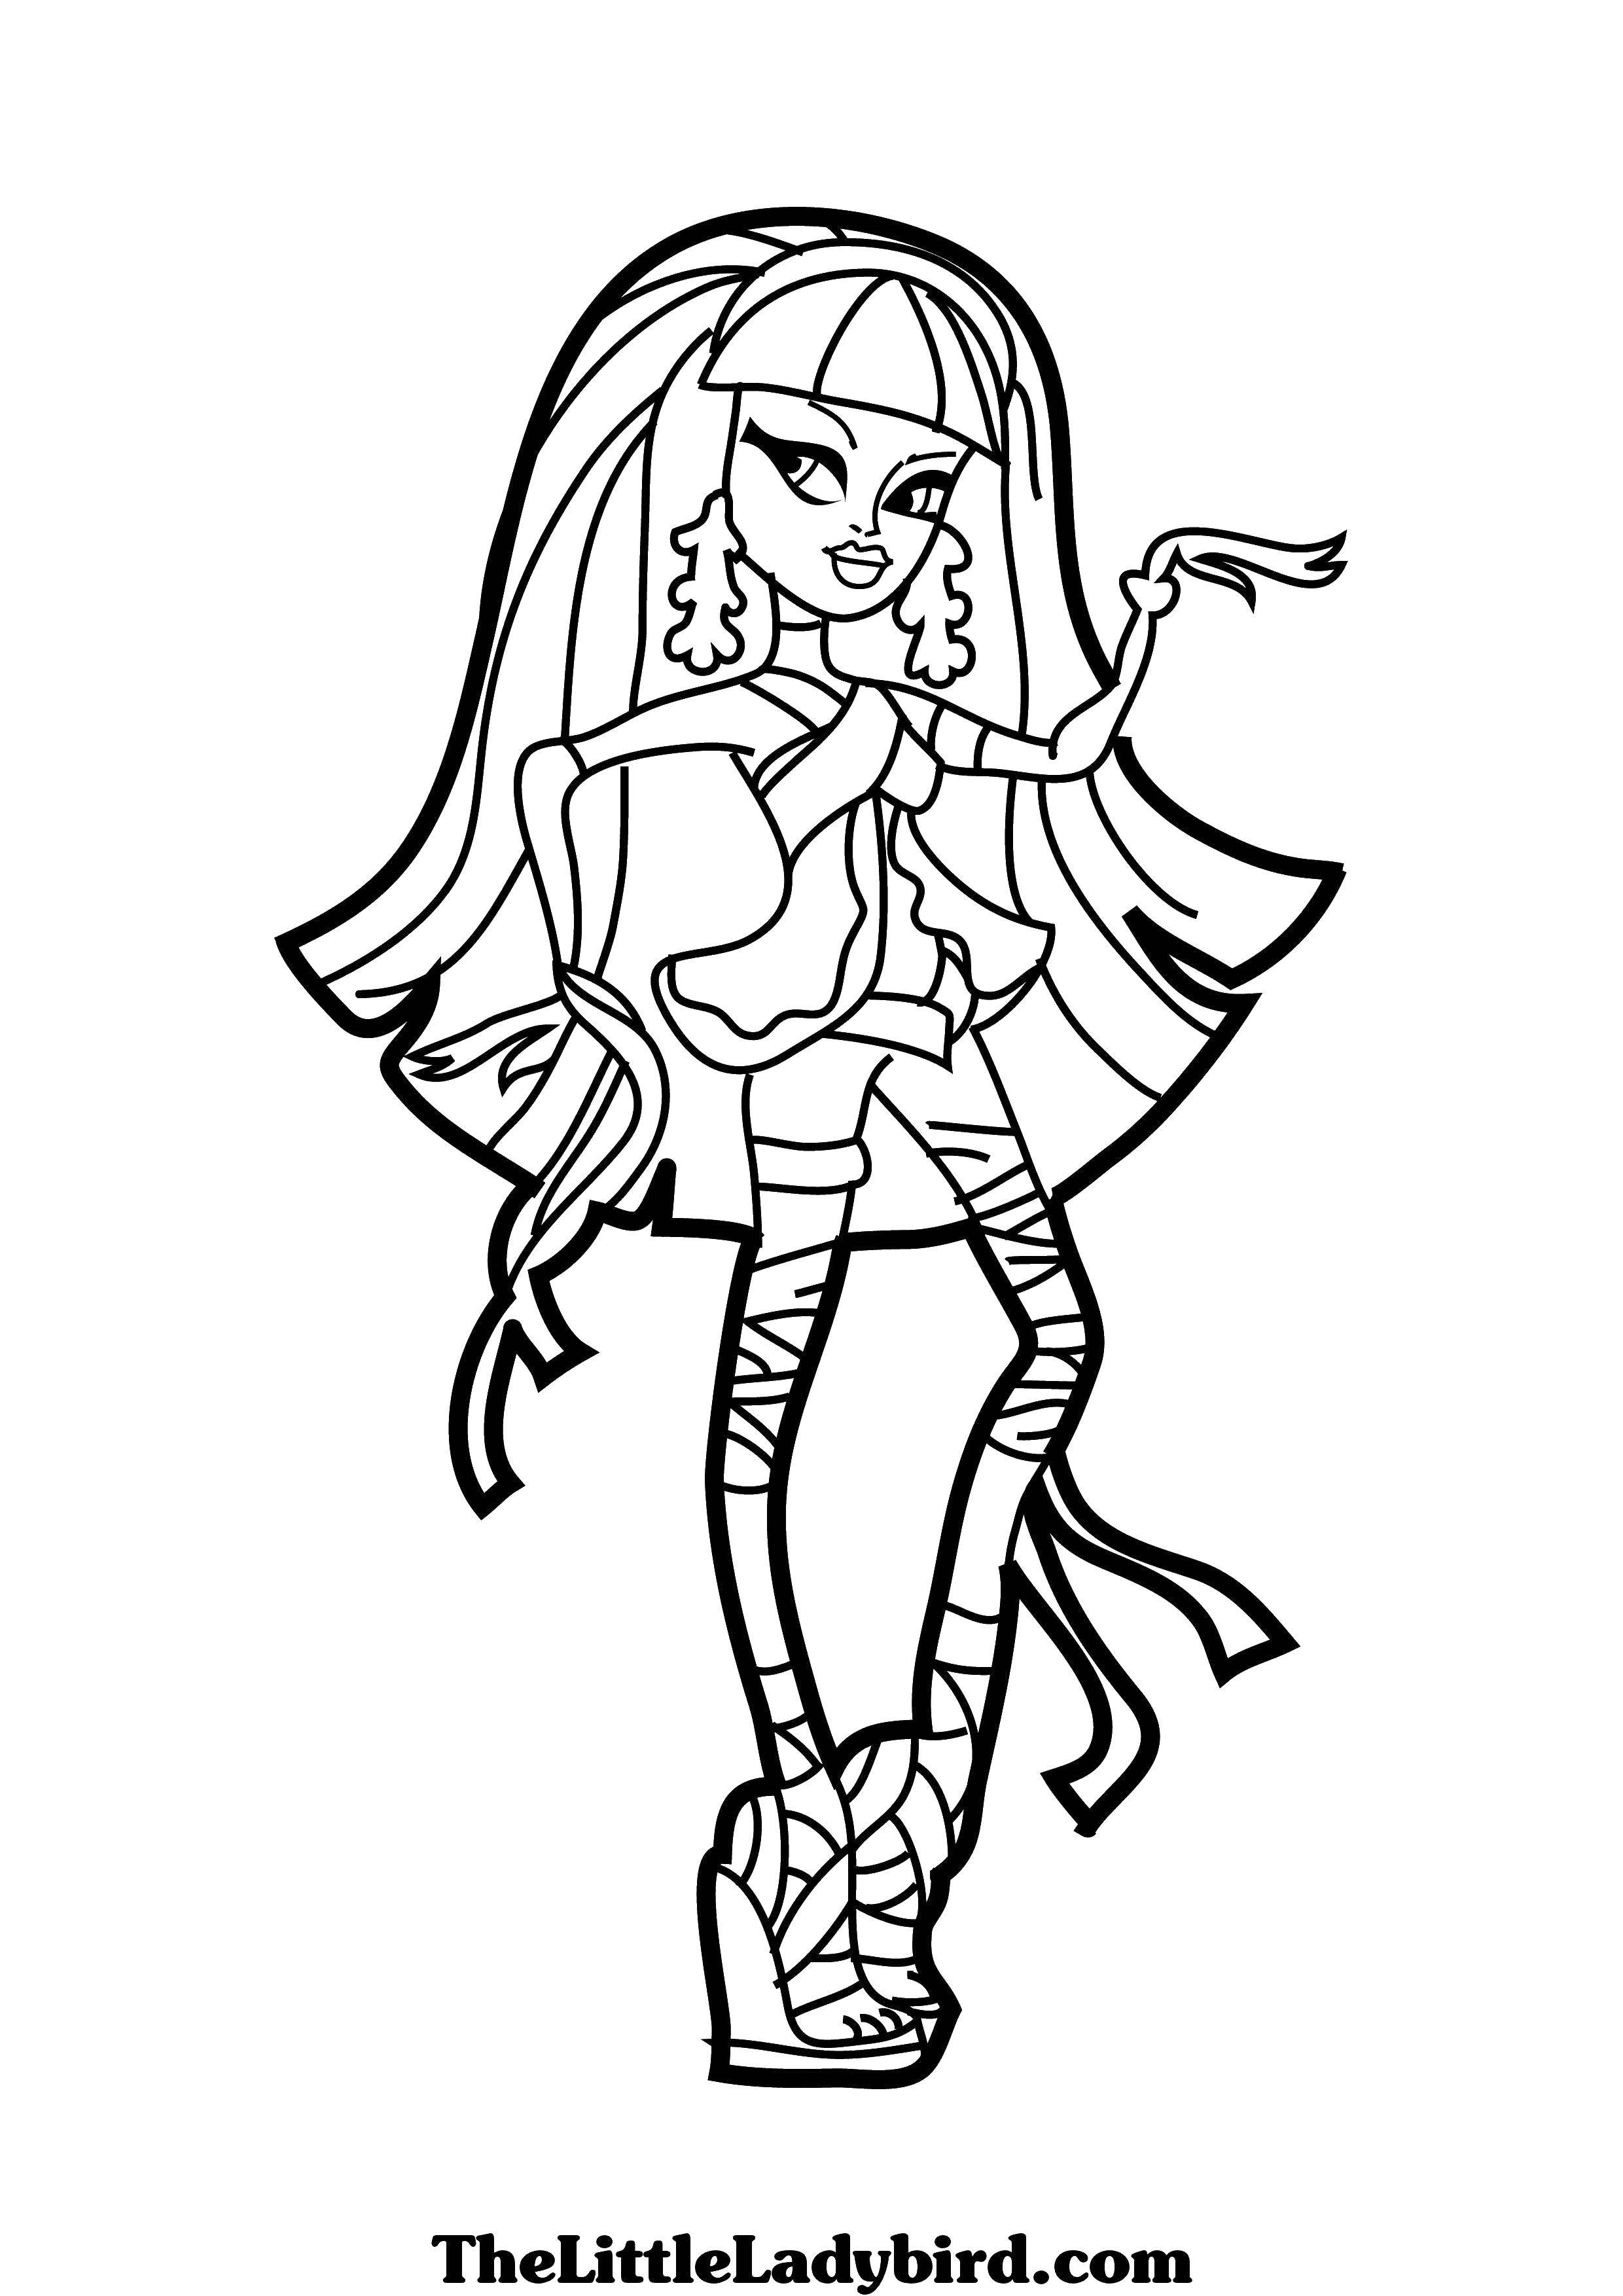 Coloring Cleo de Nile. Category Cartoon character. Tags:  Cleo de Nile, Monster high.